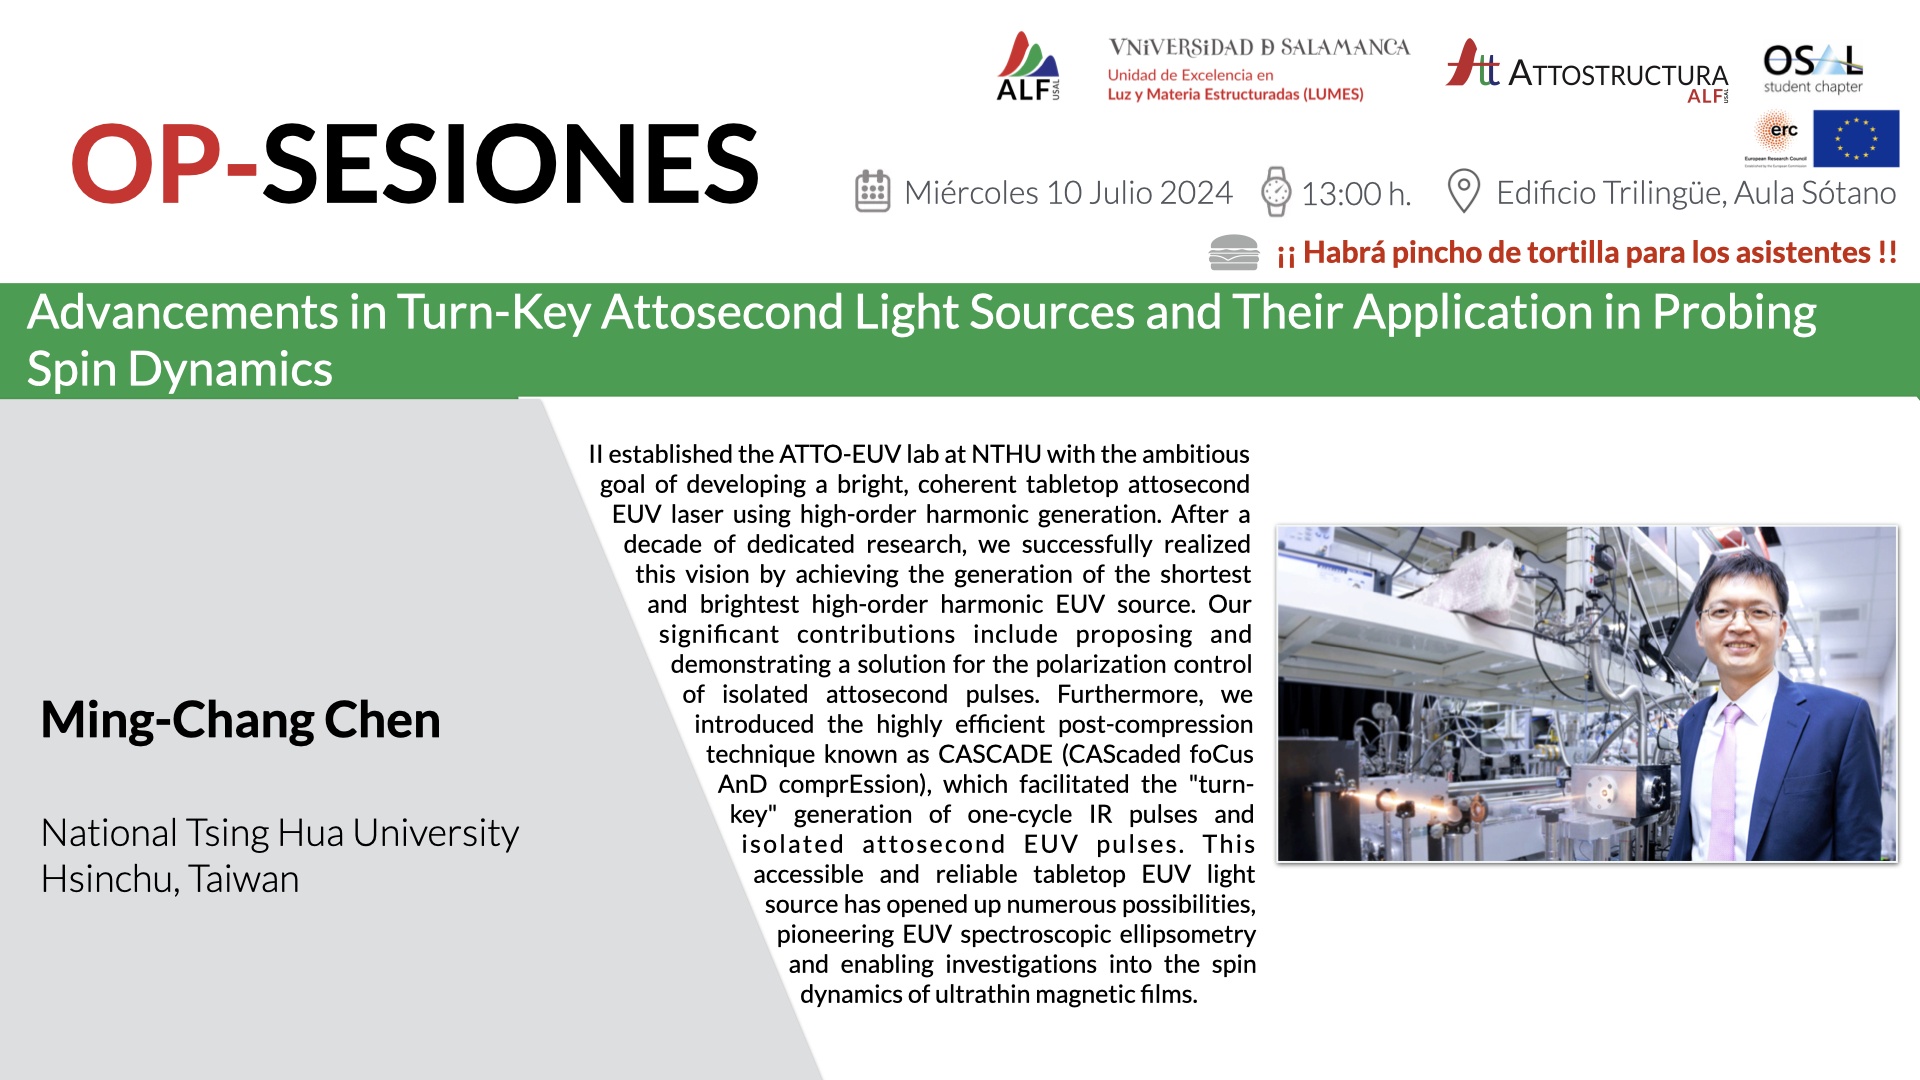 OP Sesión – Advancements in Turn-Key Attosecond Light Sources and Their Application in Probing Spin Dynamics